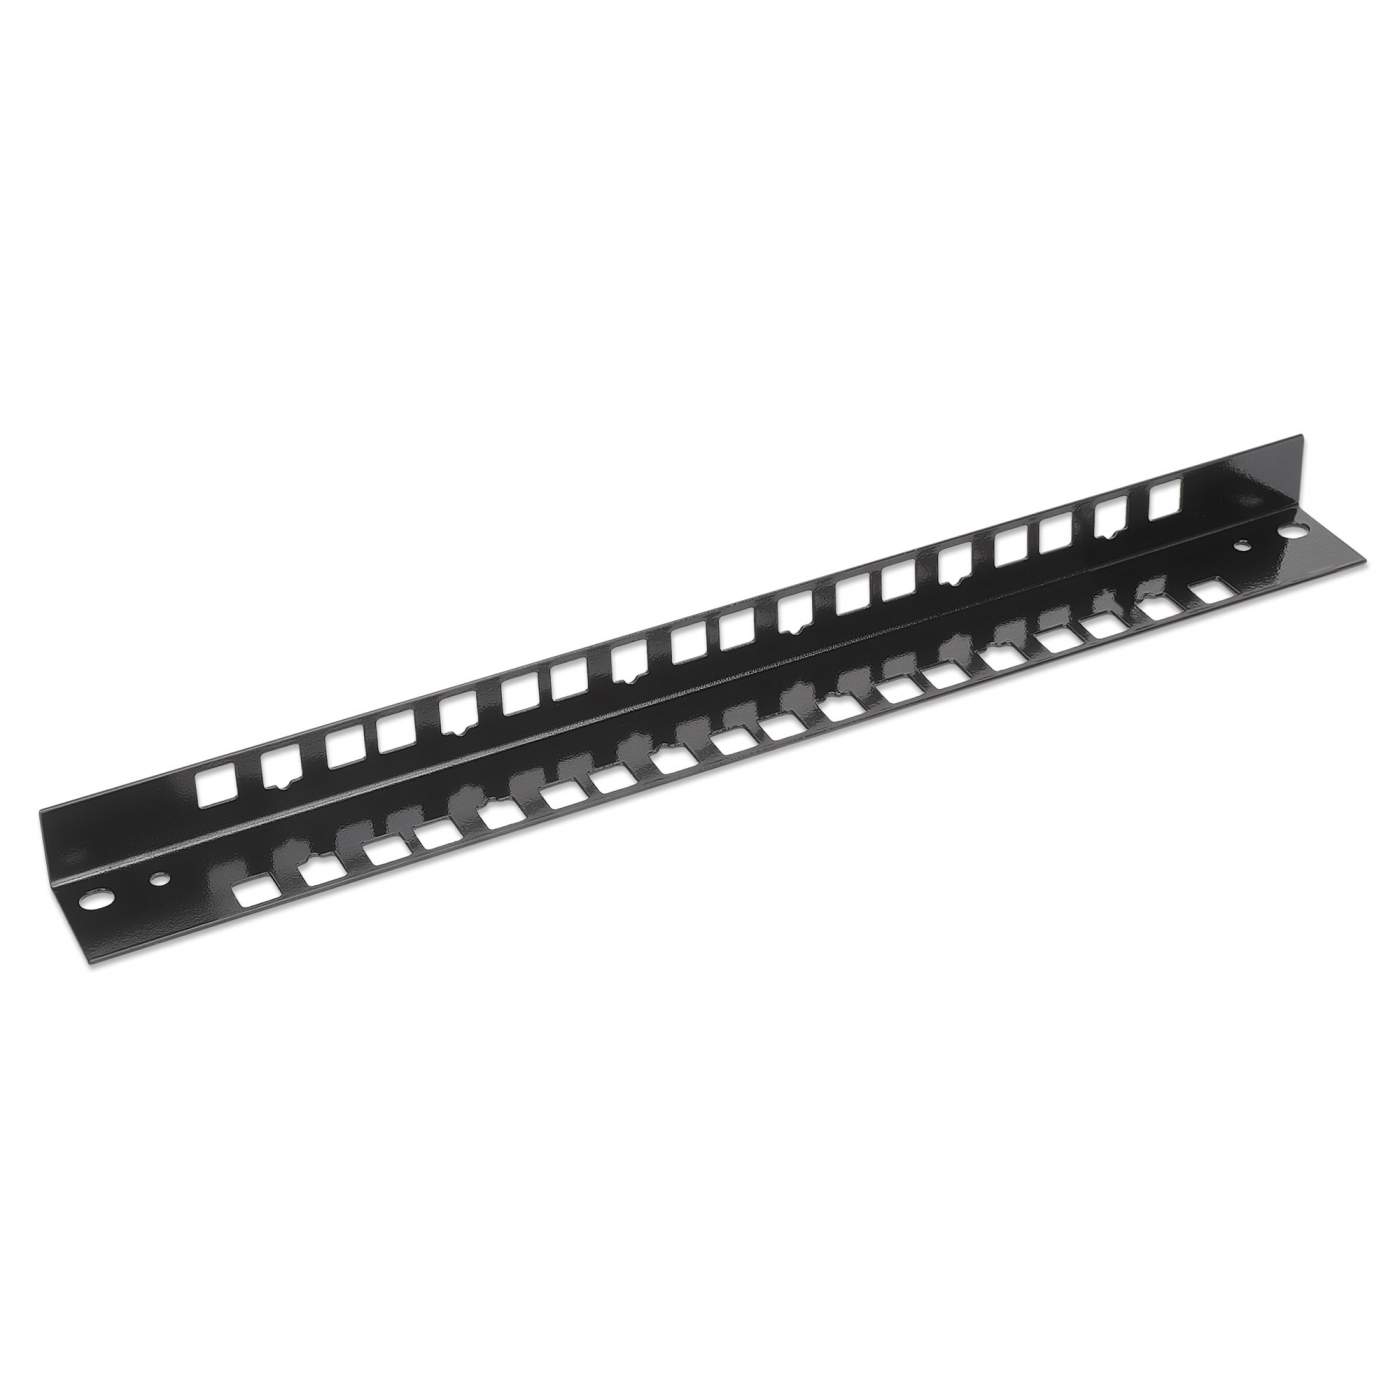 Spare Rails for 19" Wallmount Cabinets, 6U Image 2